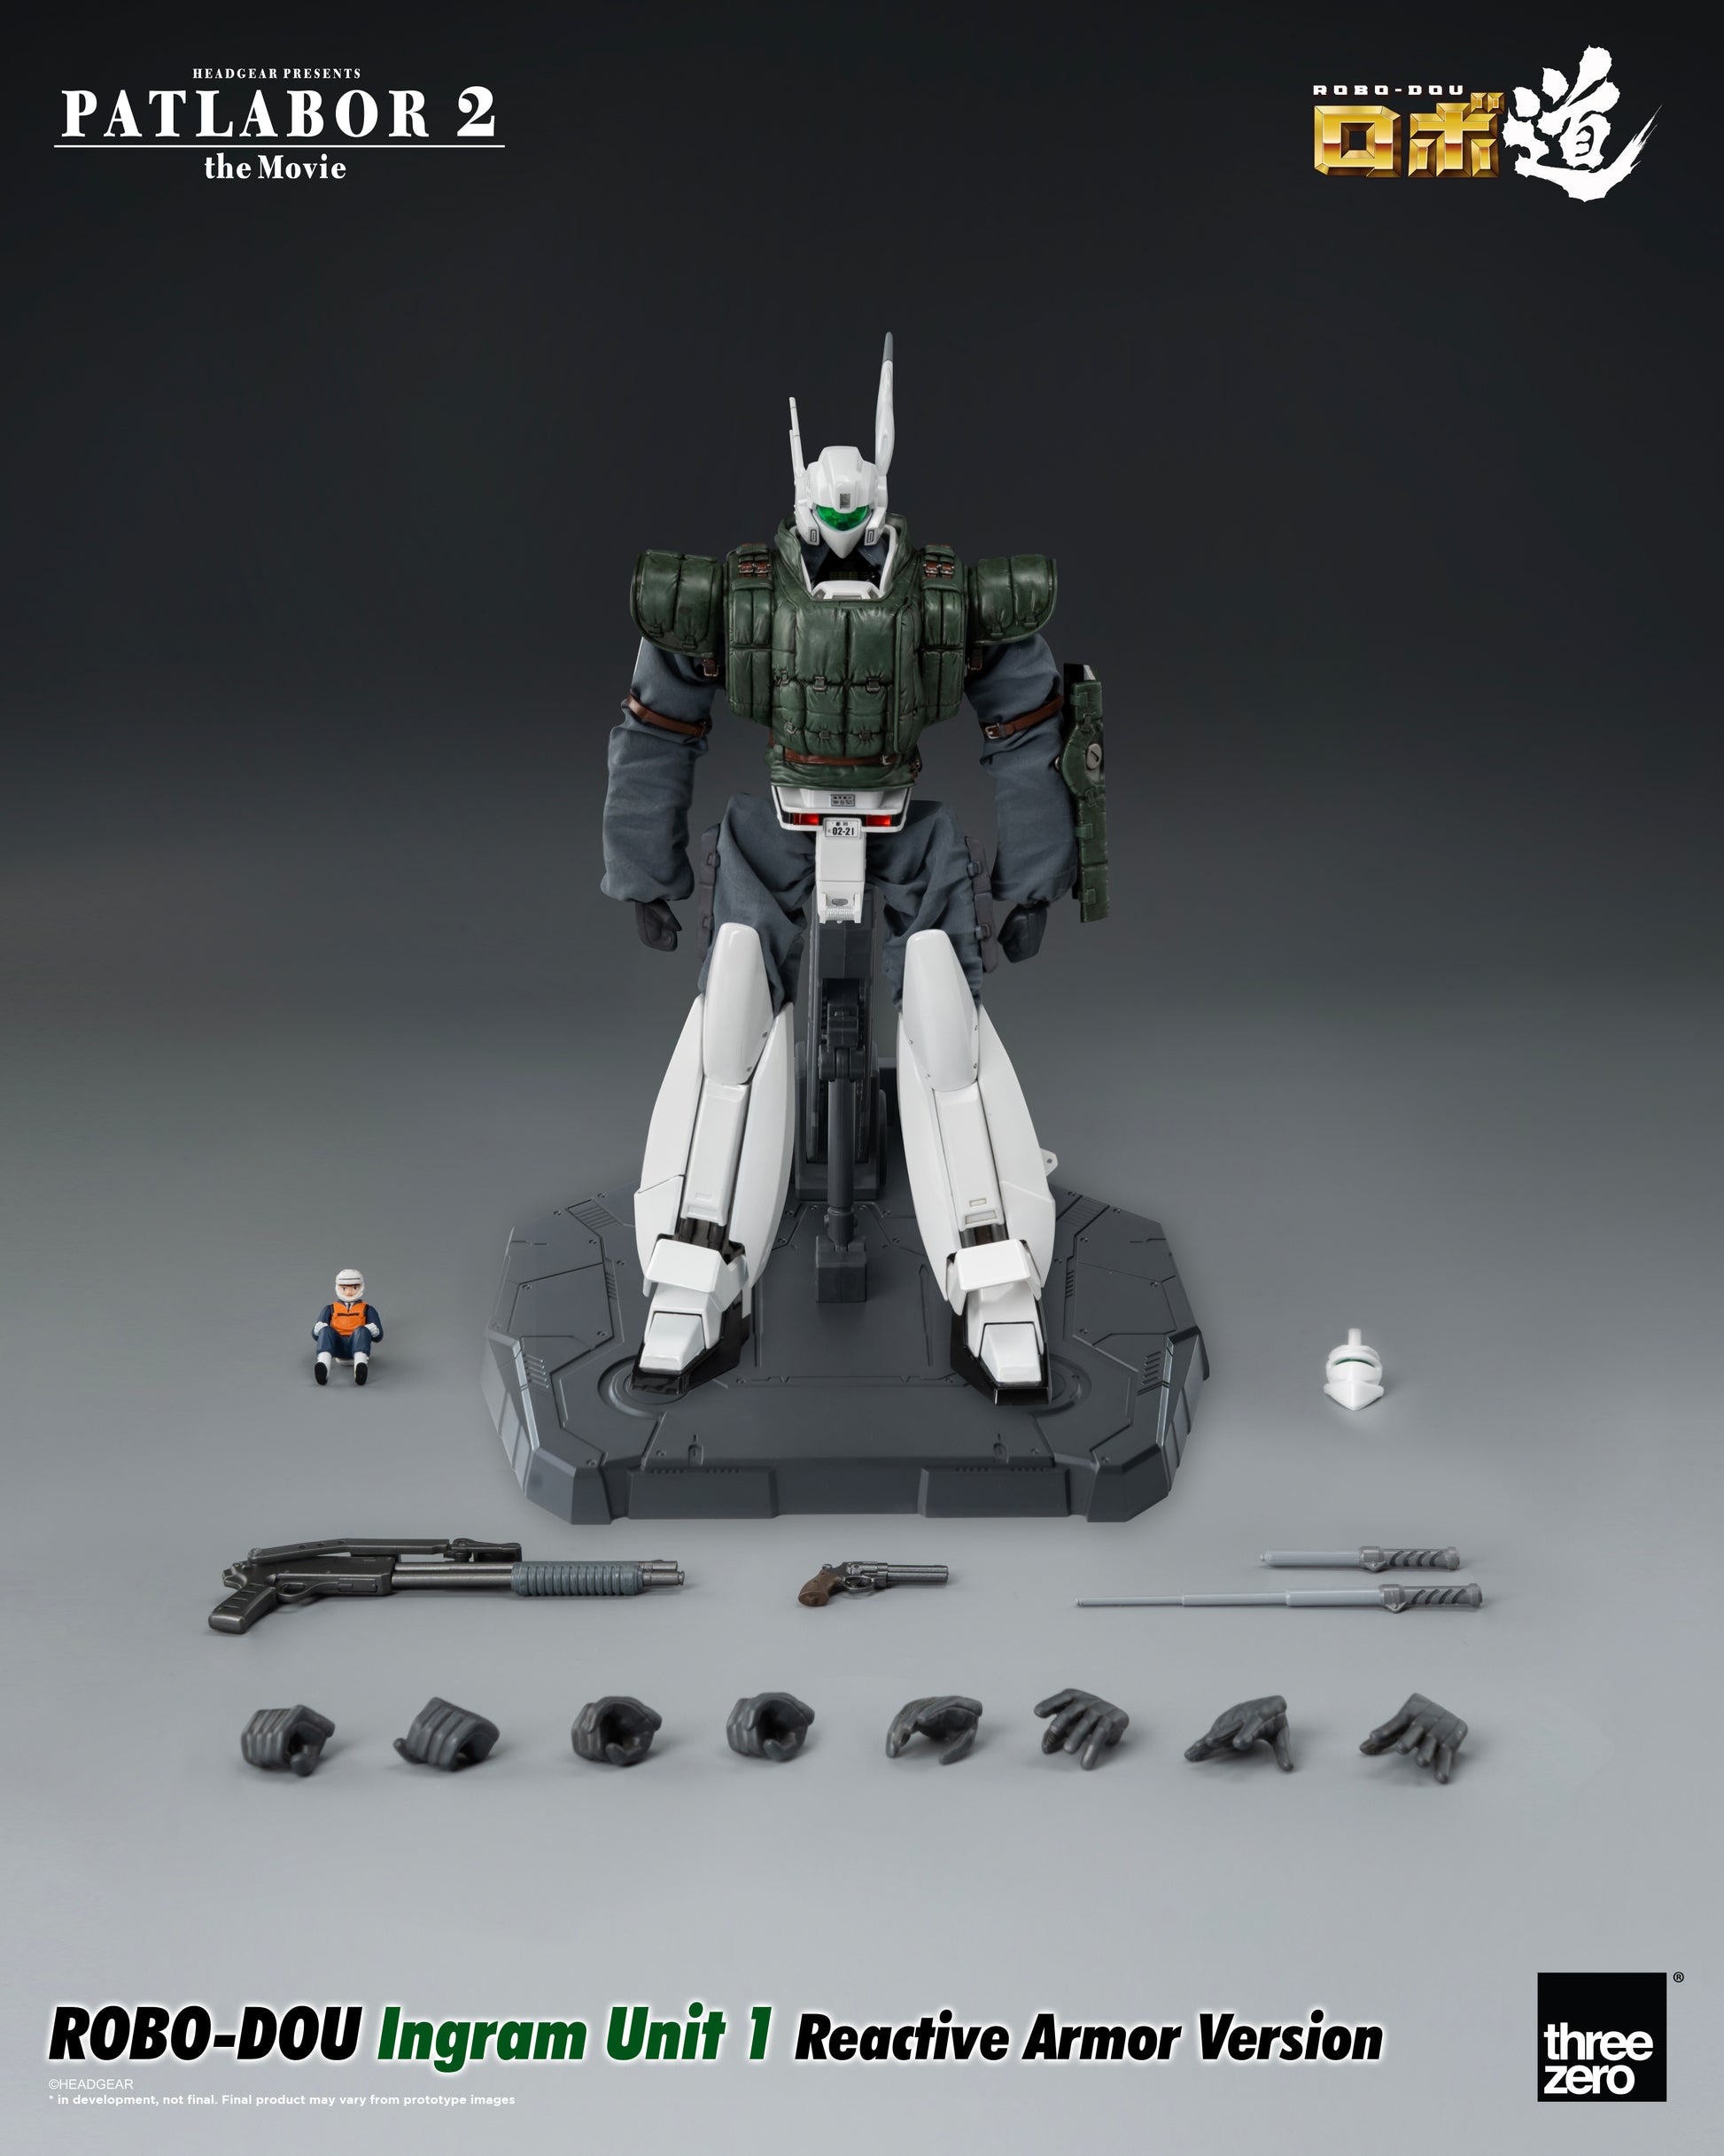 The Movie - ROBO-DOU Ingram Unit 1 Reactive Armor Version showing all the parts and accessories